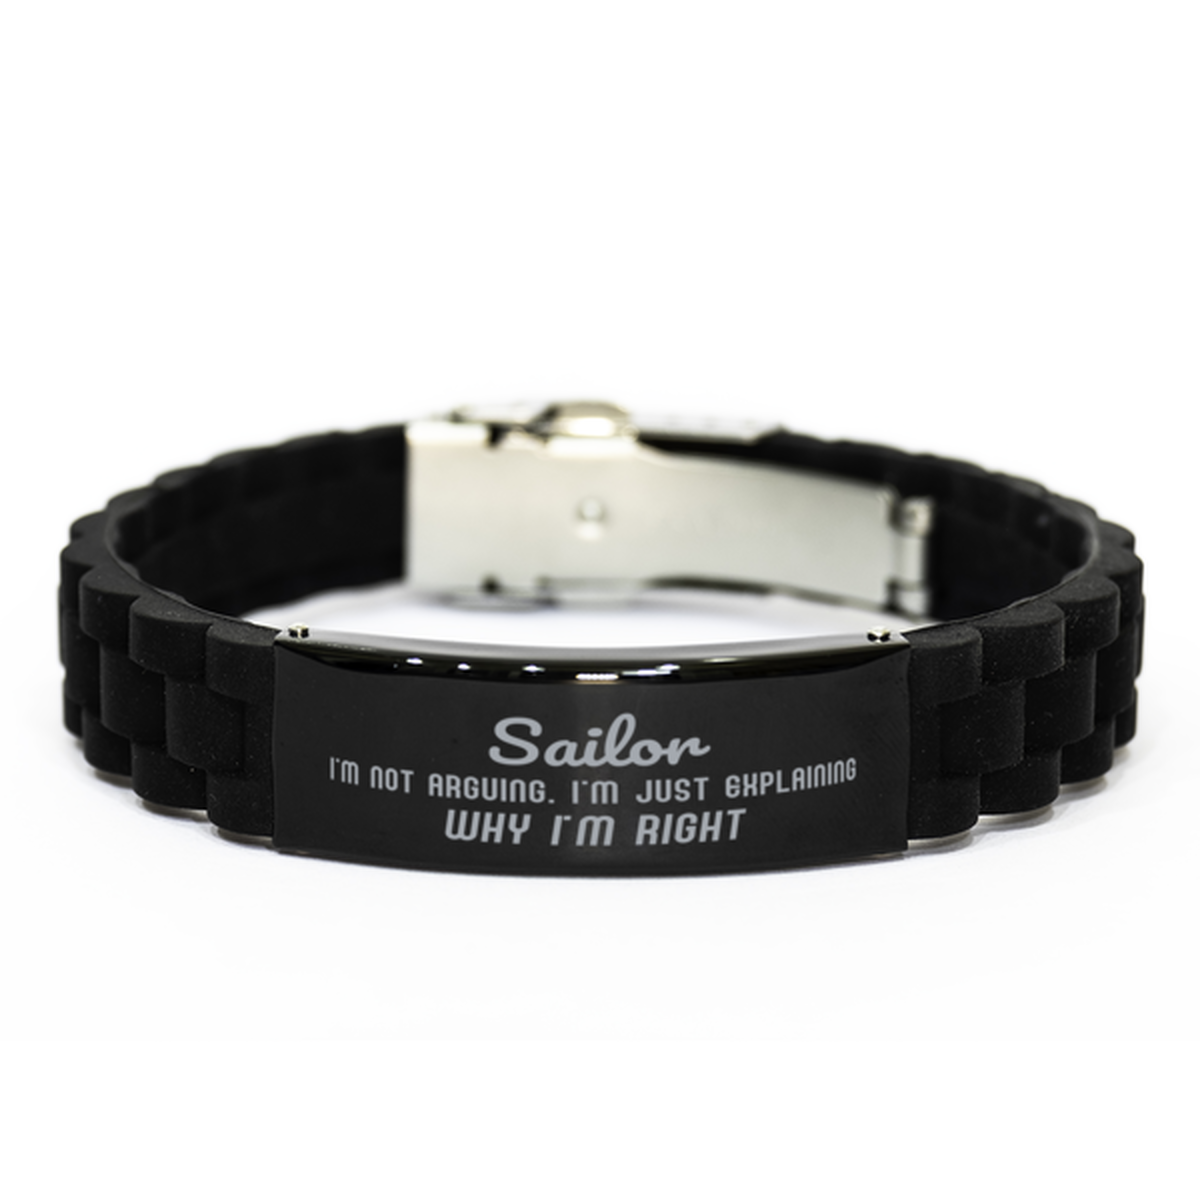 Sailor I'm not Arguing. I'm Just Explaining Why I'm RIGHT Black Glidelock Clasp Bracelet, Funny Saying Quote Sailor Gifts For Sailor Graduation Birthday Christmas Gifts for Men Women Coworker